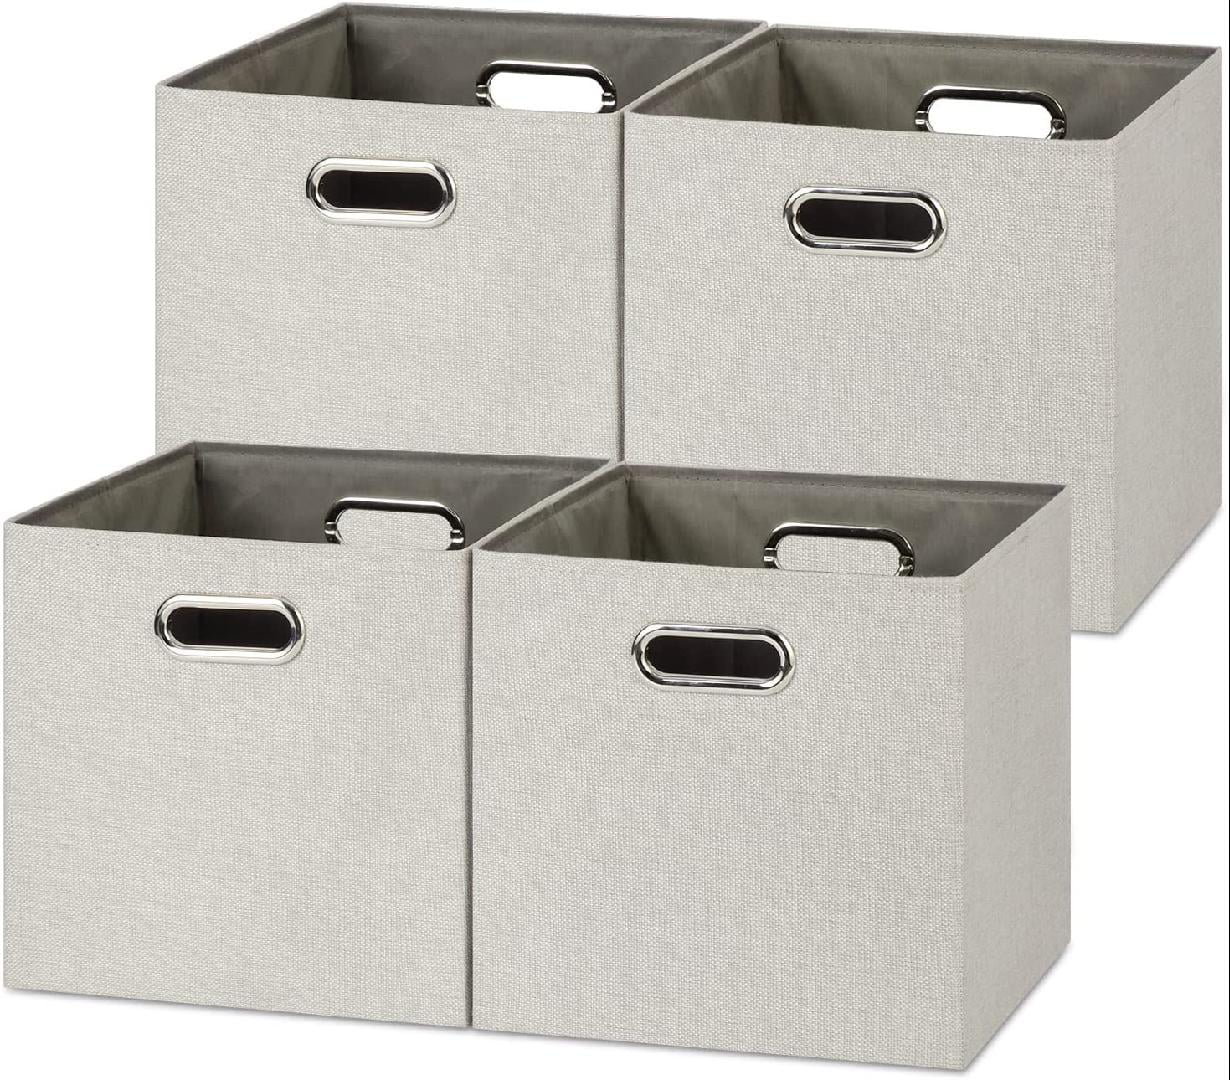  DULLEMELO 12x12x12 Storage Cube Bins, Organization and Storage  Bins with Handles for Organizing Book Clothes in the Office, Home, Canvas Storage  Bin for Toys Storage, Organizing Baskets for Shelves